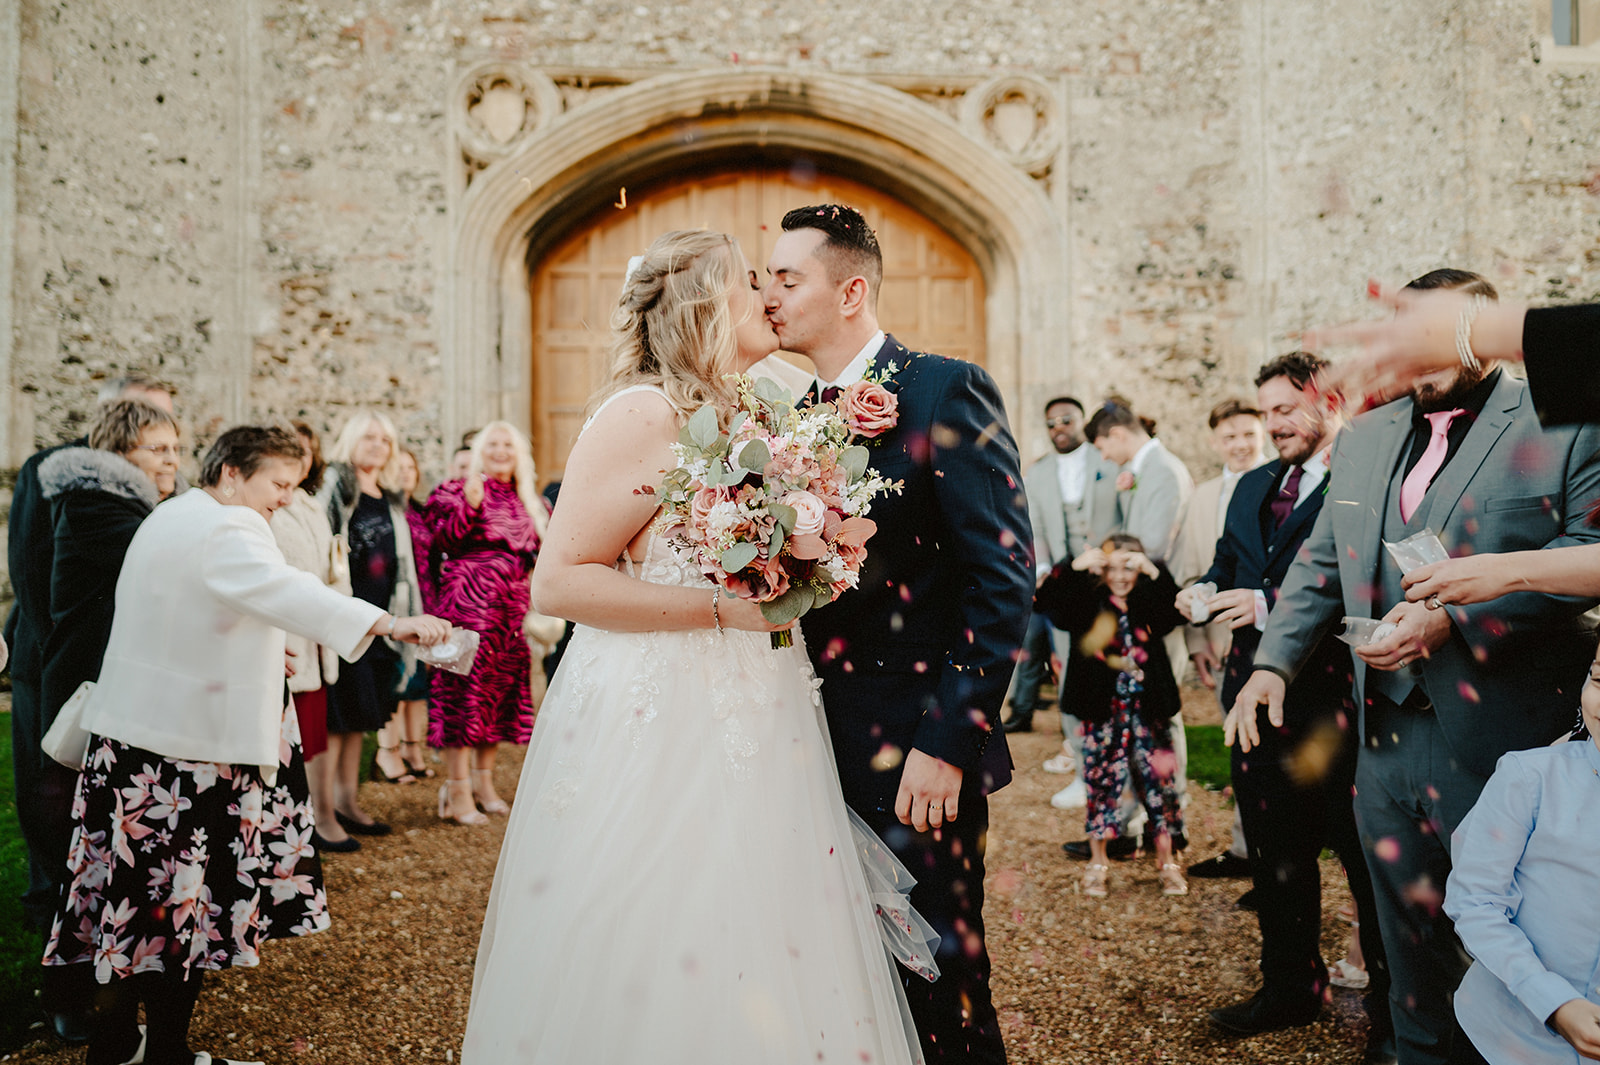 a kiss during the fun confetti throw minutes after the wedding ceremony at pentney abbey